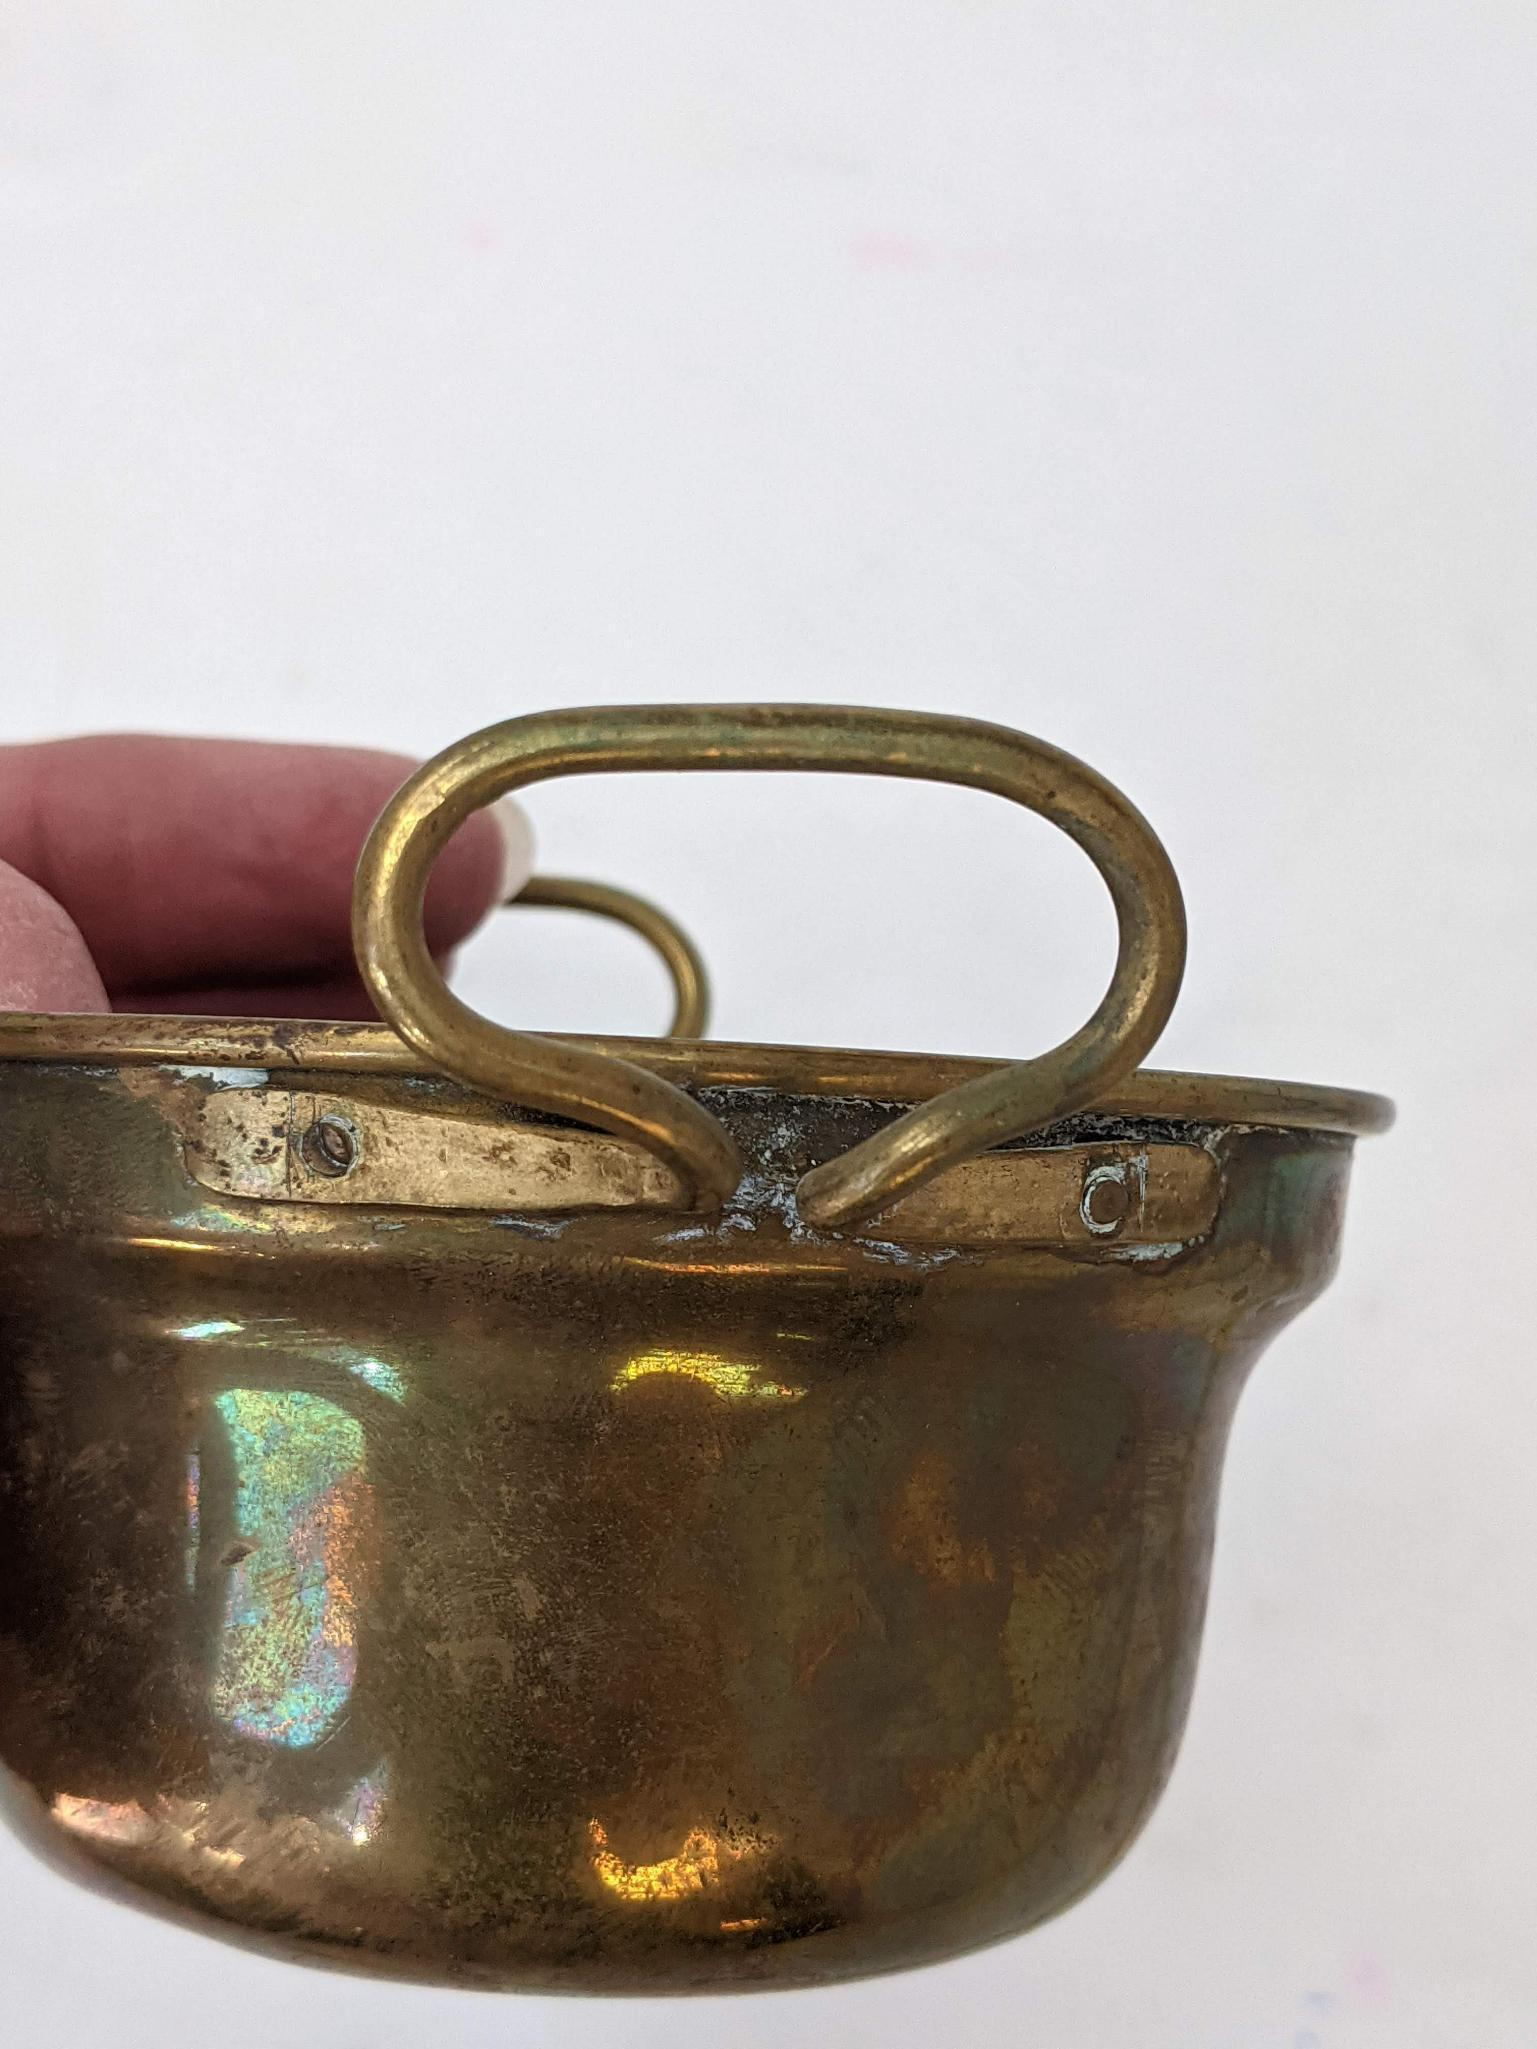 Miniature Copper Molds and Handled Pan